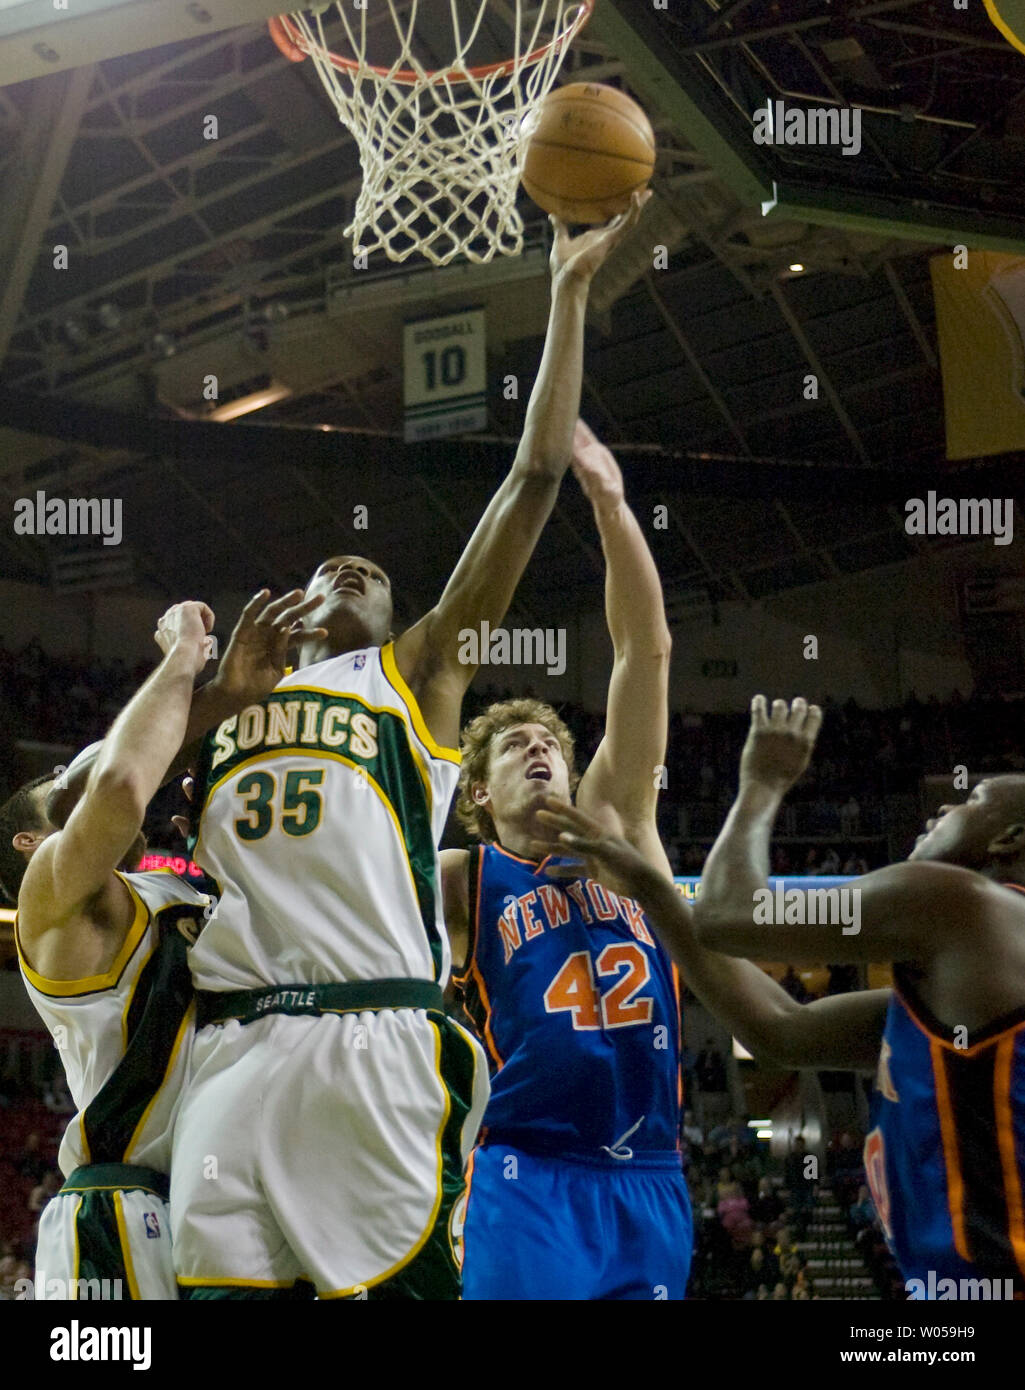 Seattle SuperSonics' Kevin Durant (35) is fouled by New York Knicks' David Lee (42) as he scores a layup during the second half at the Key Arena in Seattle on February 2, 2008. Durant led the SuperSonics with 21 points in their 86-85 win over the New York Knicks. Also defending against Durant is Knicks Zach Randolph (R). (UPI Photo/Jim Bryant) Stock Photo